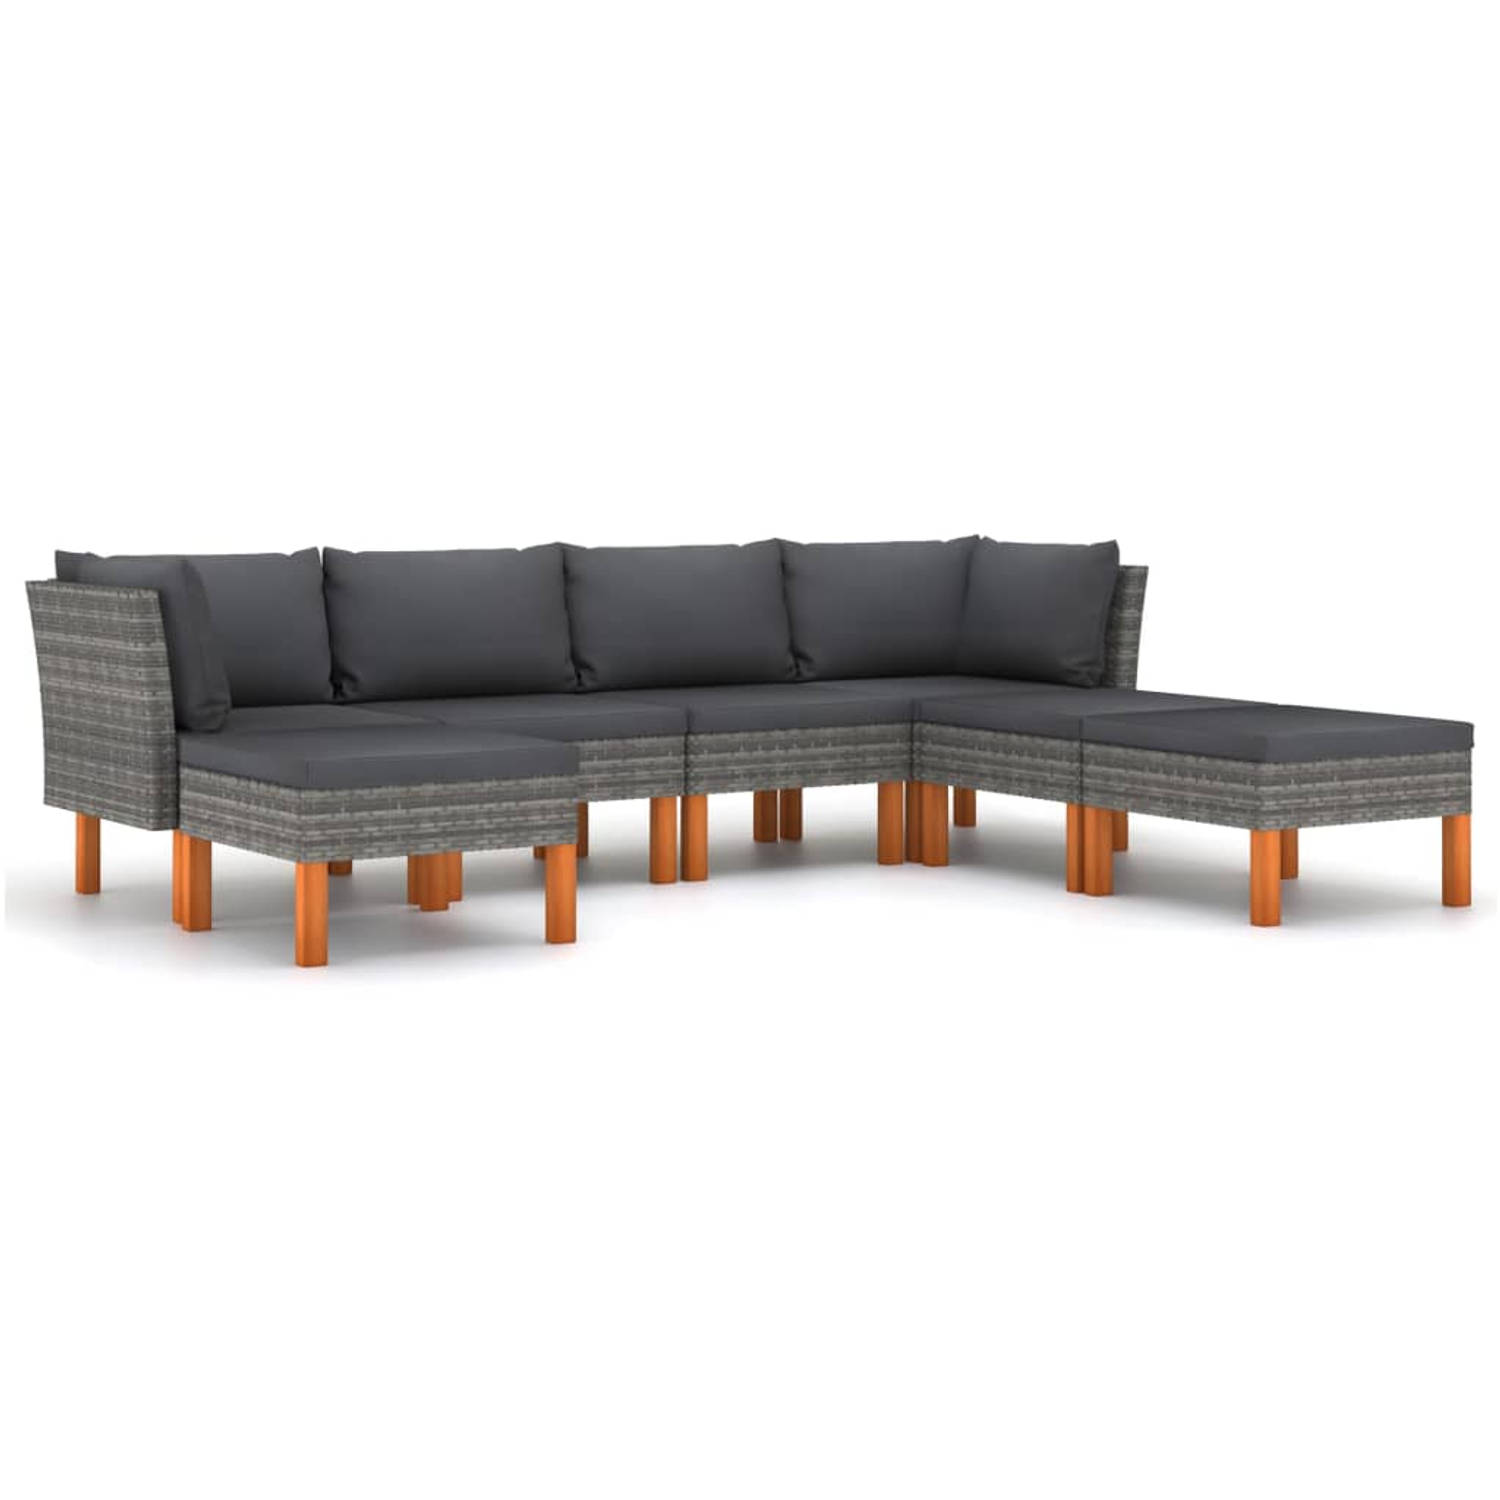 The Living Store Loungeset - Tuinmeubelset - Grijs - 5-delig